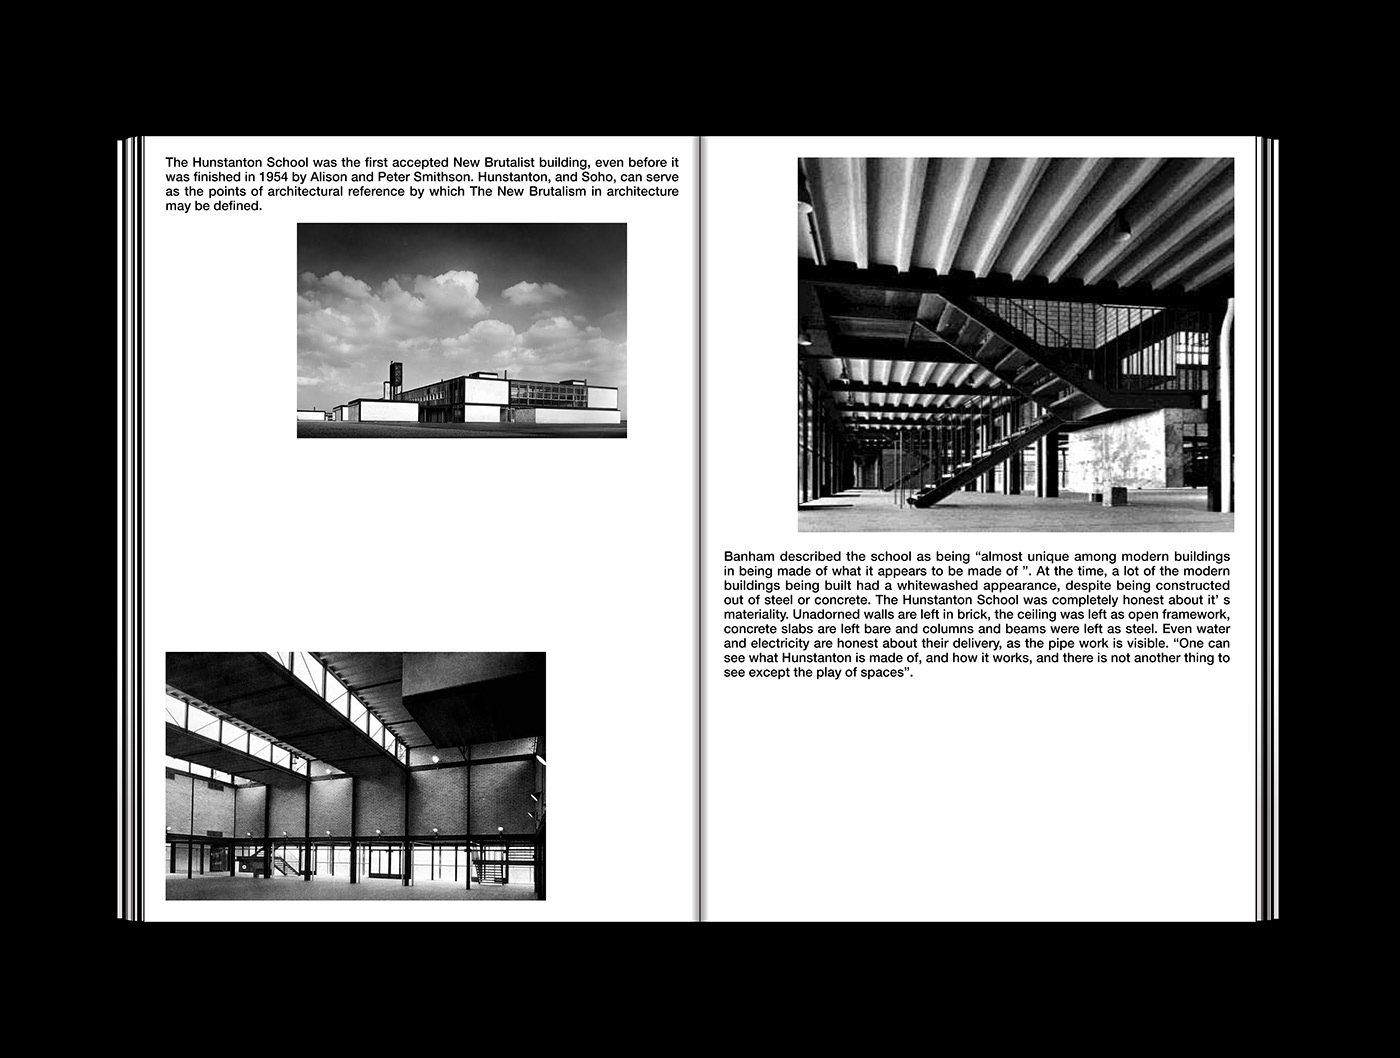 architecture book Brutalism design editorial graphicdesign history poster typography   visual identity